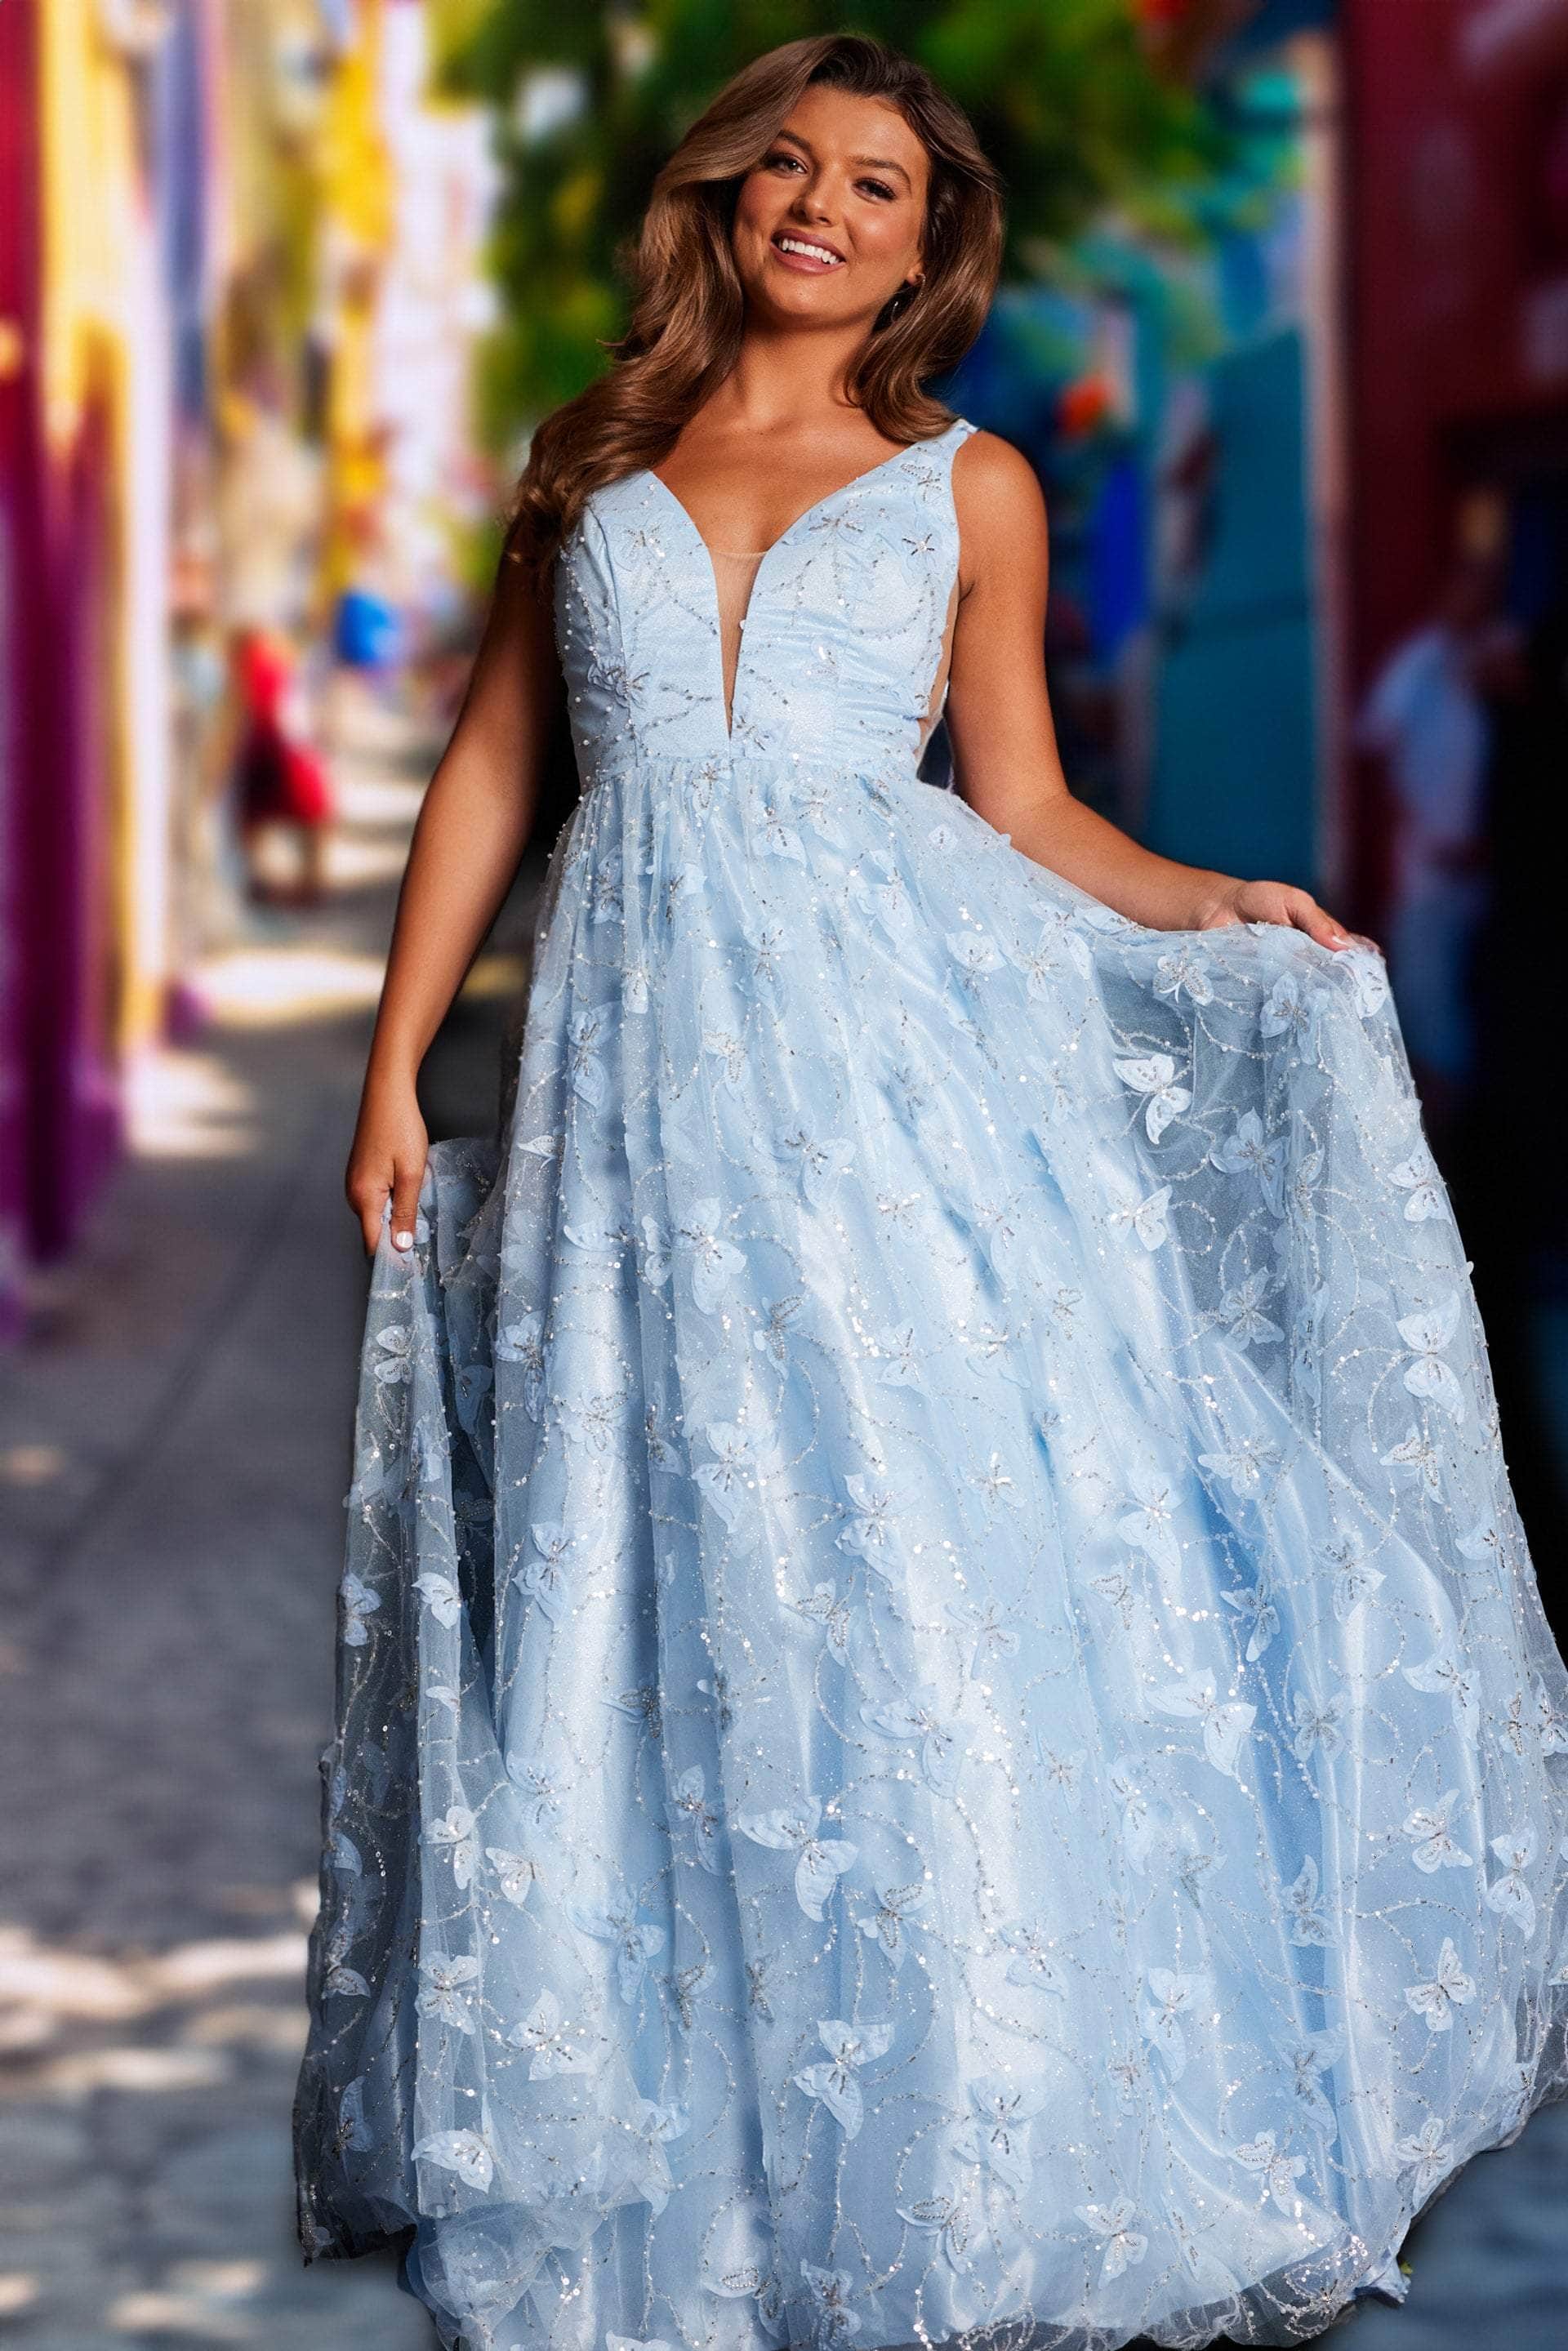 Transform Into a Butterfly When You Slip on Any of These Ethereal Wing Gowns  | Butterfly dress, Butterfly wing dress, Stunning dresses